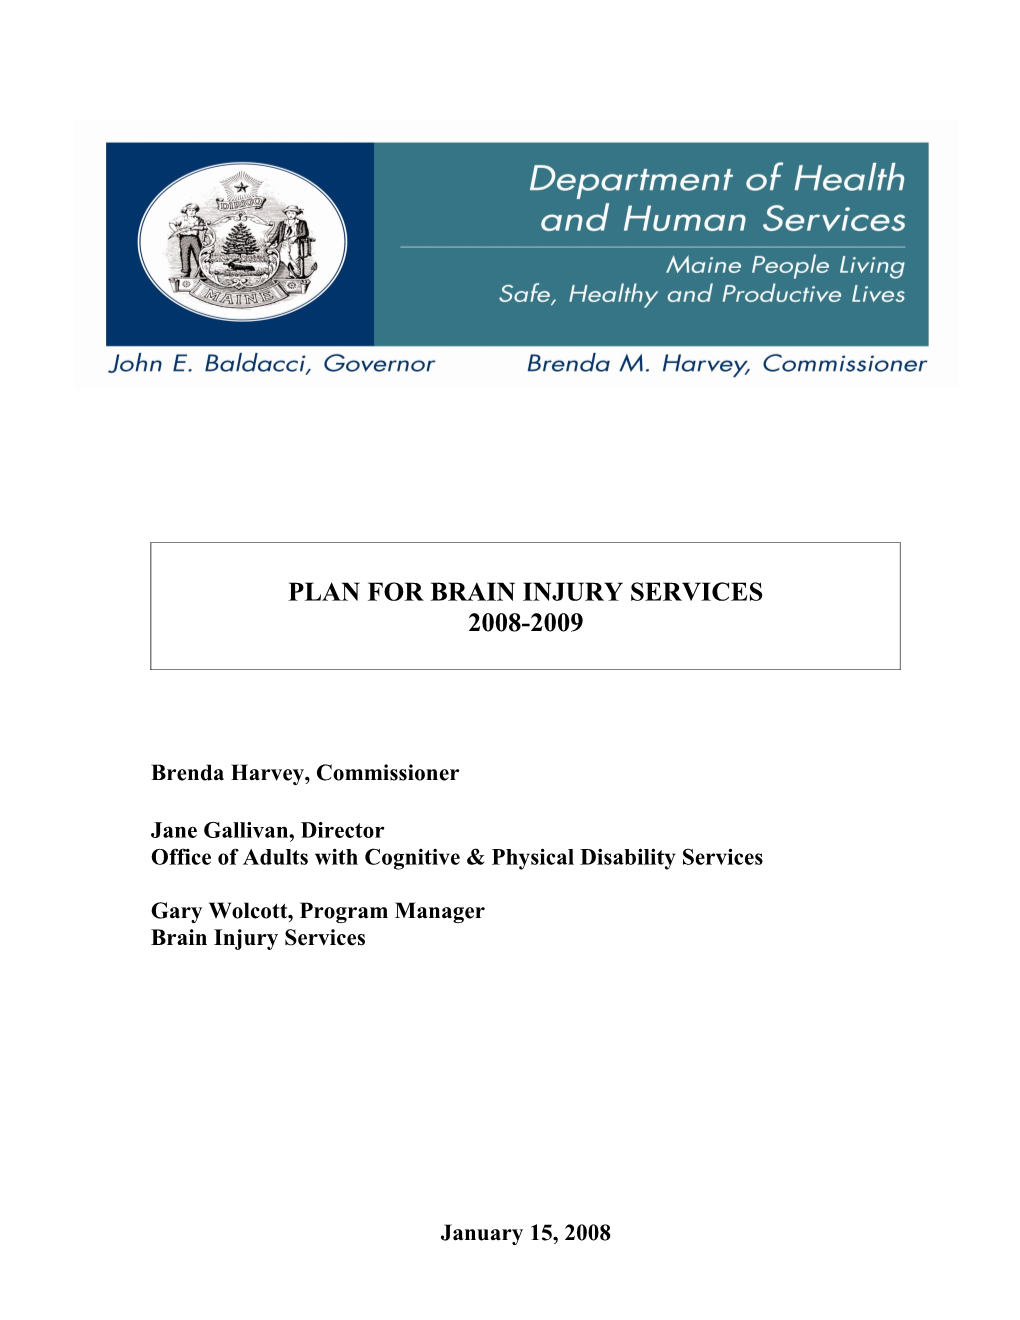 Summary of Proposed 2008-2009 Plan for Brain Injury Services